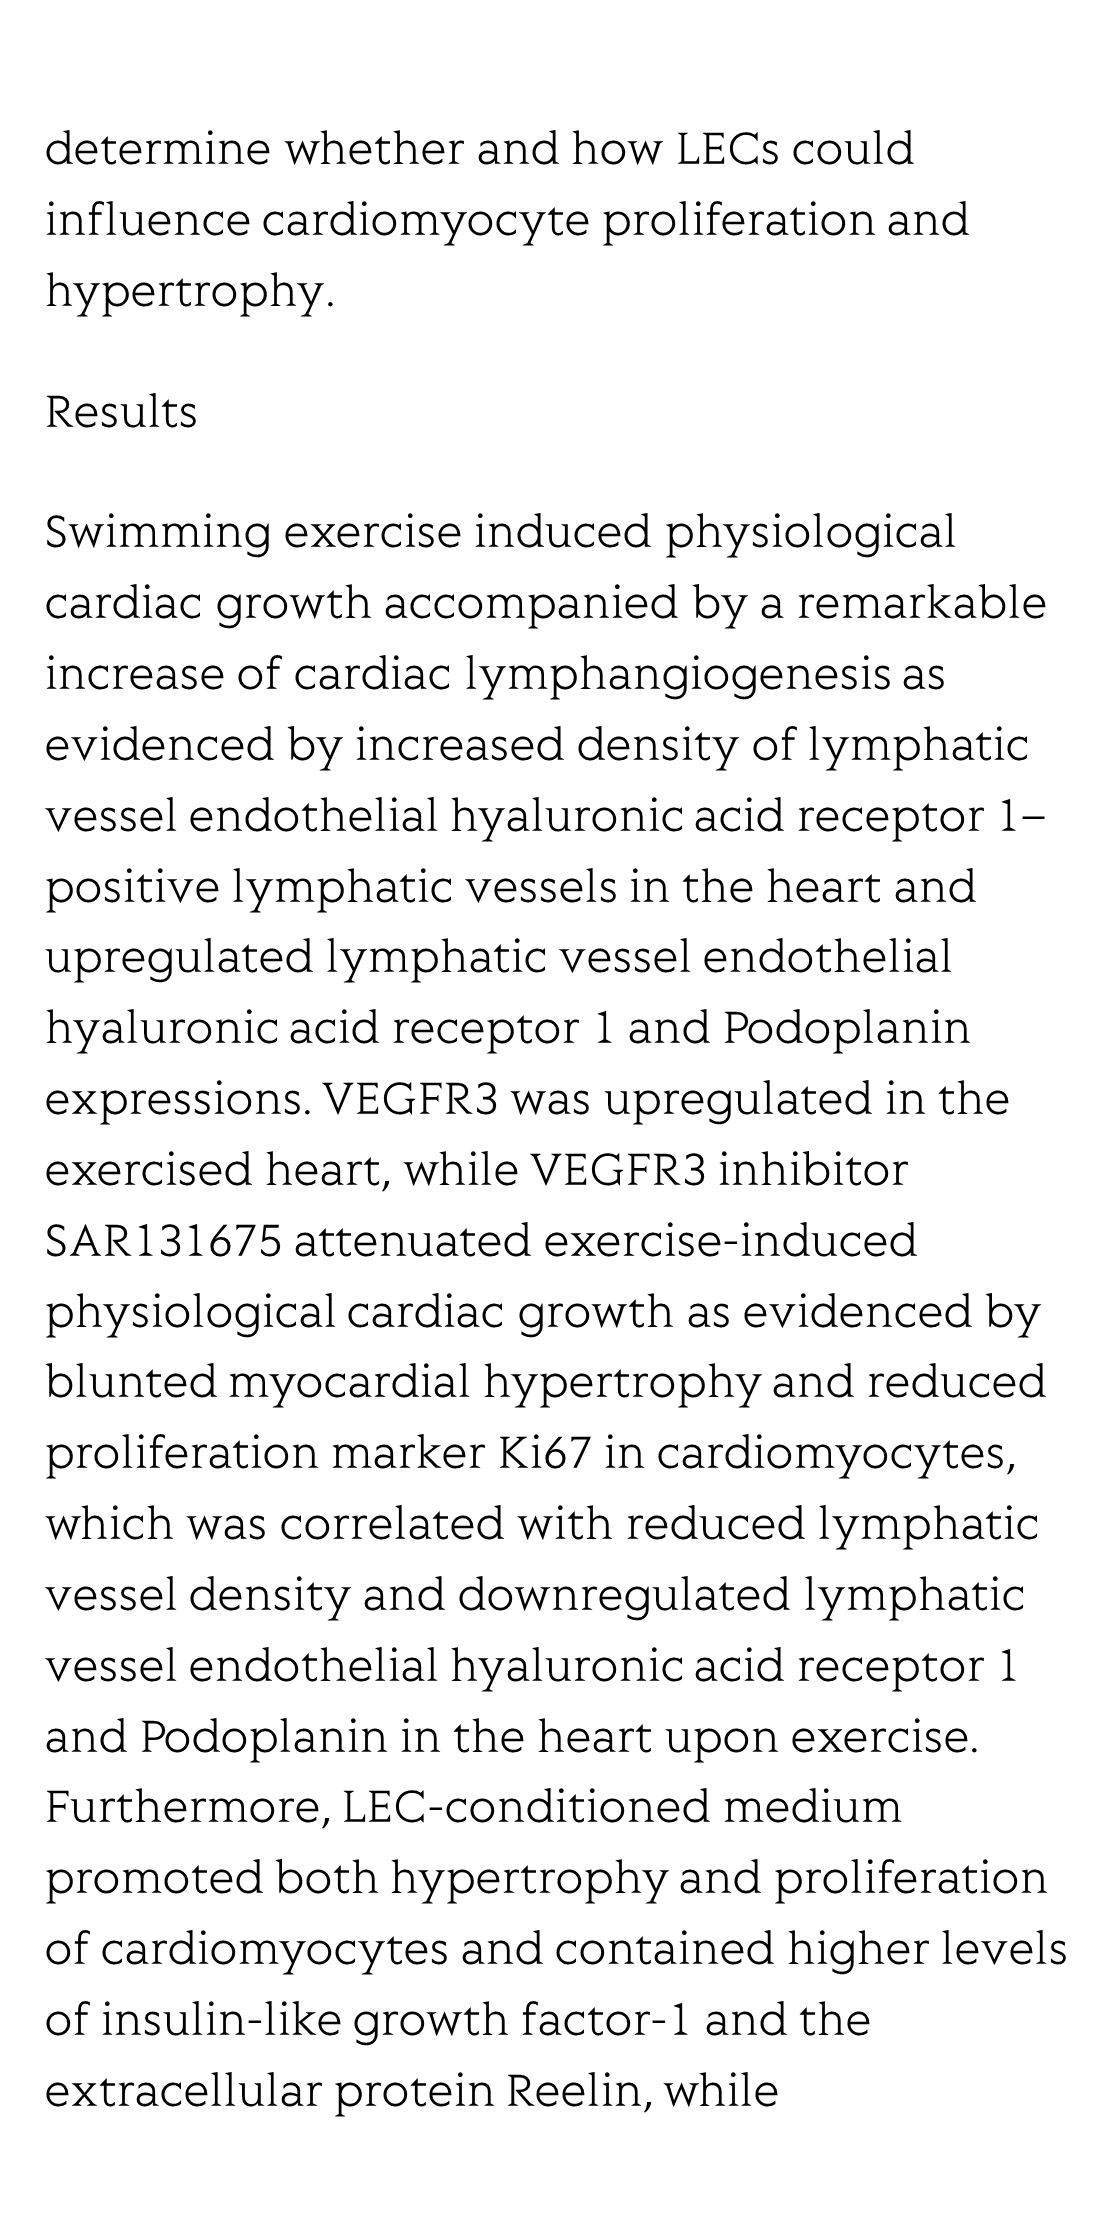 Lymphangiogenesis contributes to exercise-induced physiological cardiac growth_3